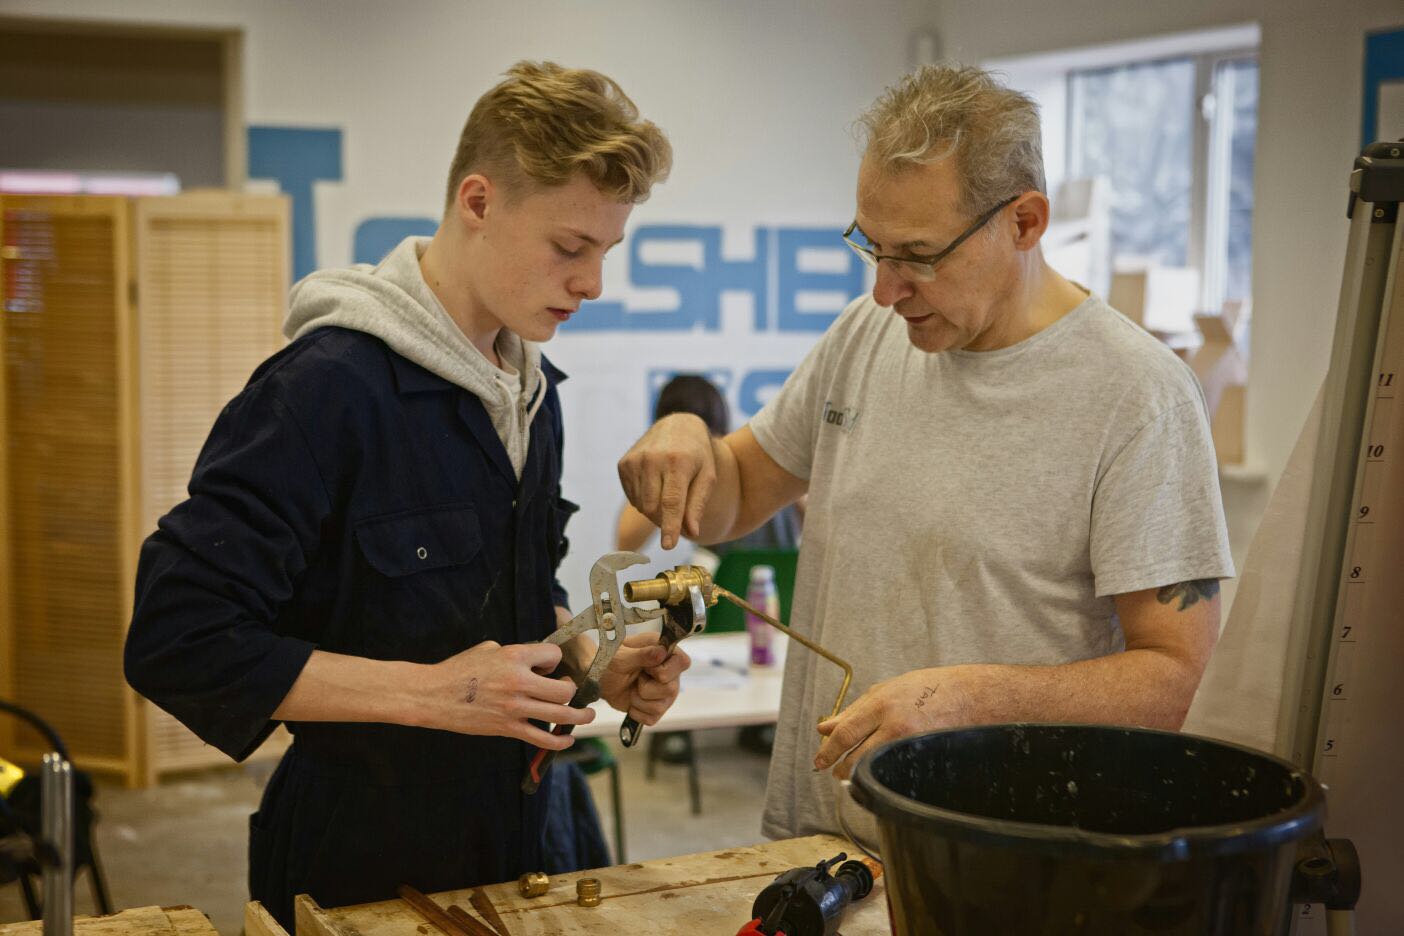 A student and teacher working at the Toolshed